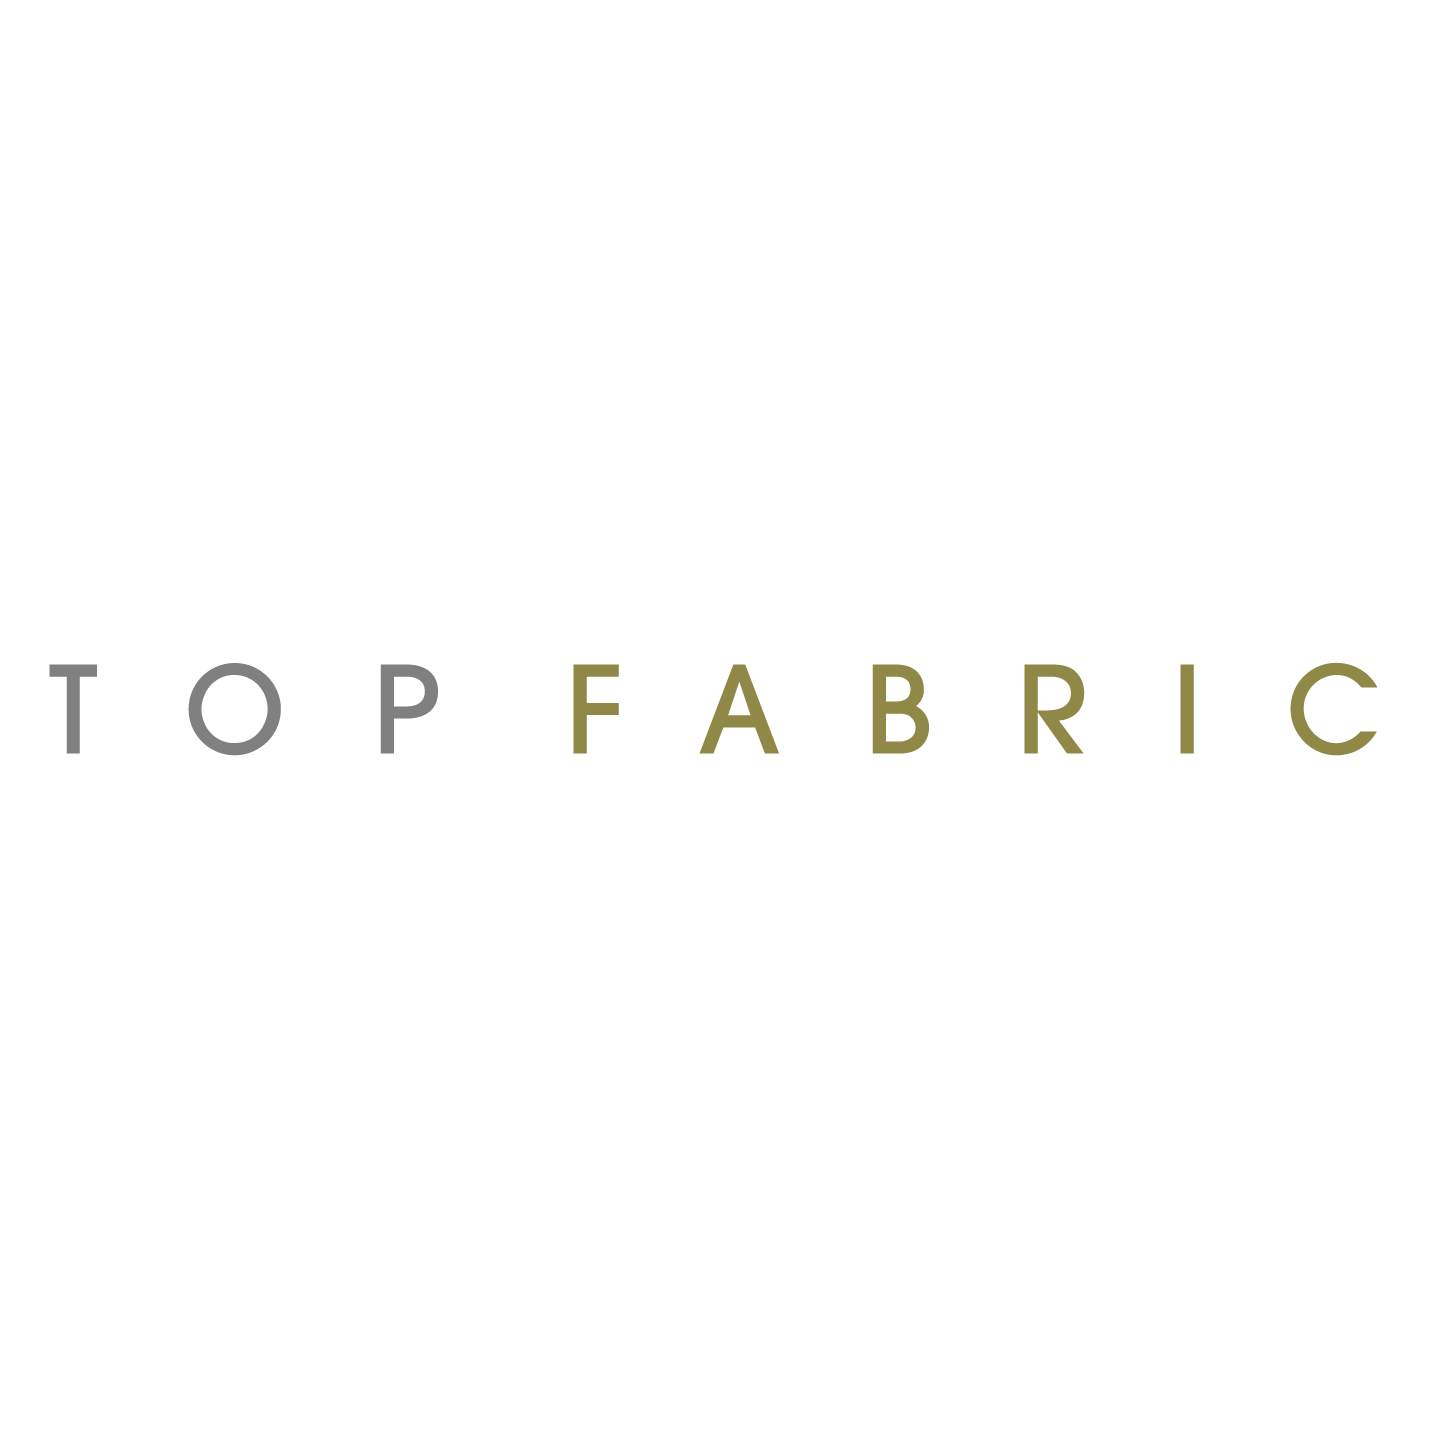 Buy fabric online - Top Fabric - The finest Fabrics From Around The World - Free shipping for fabric swatches